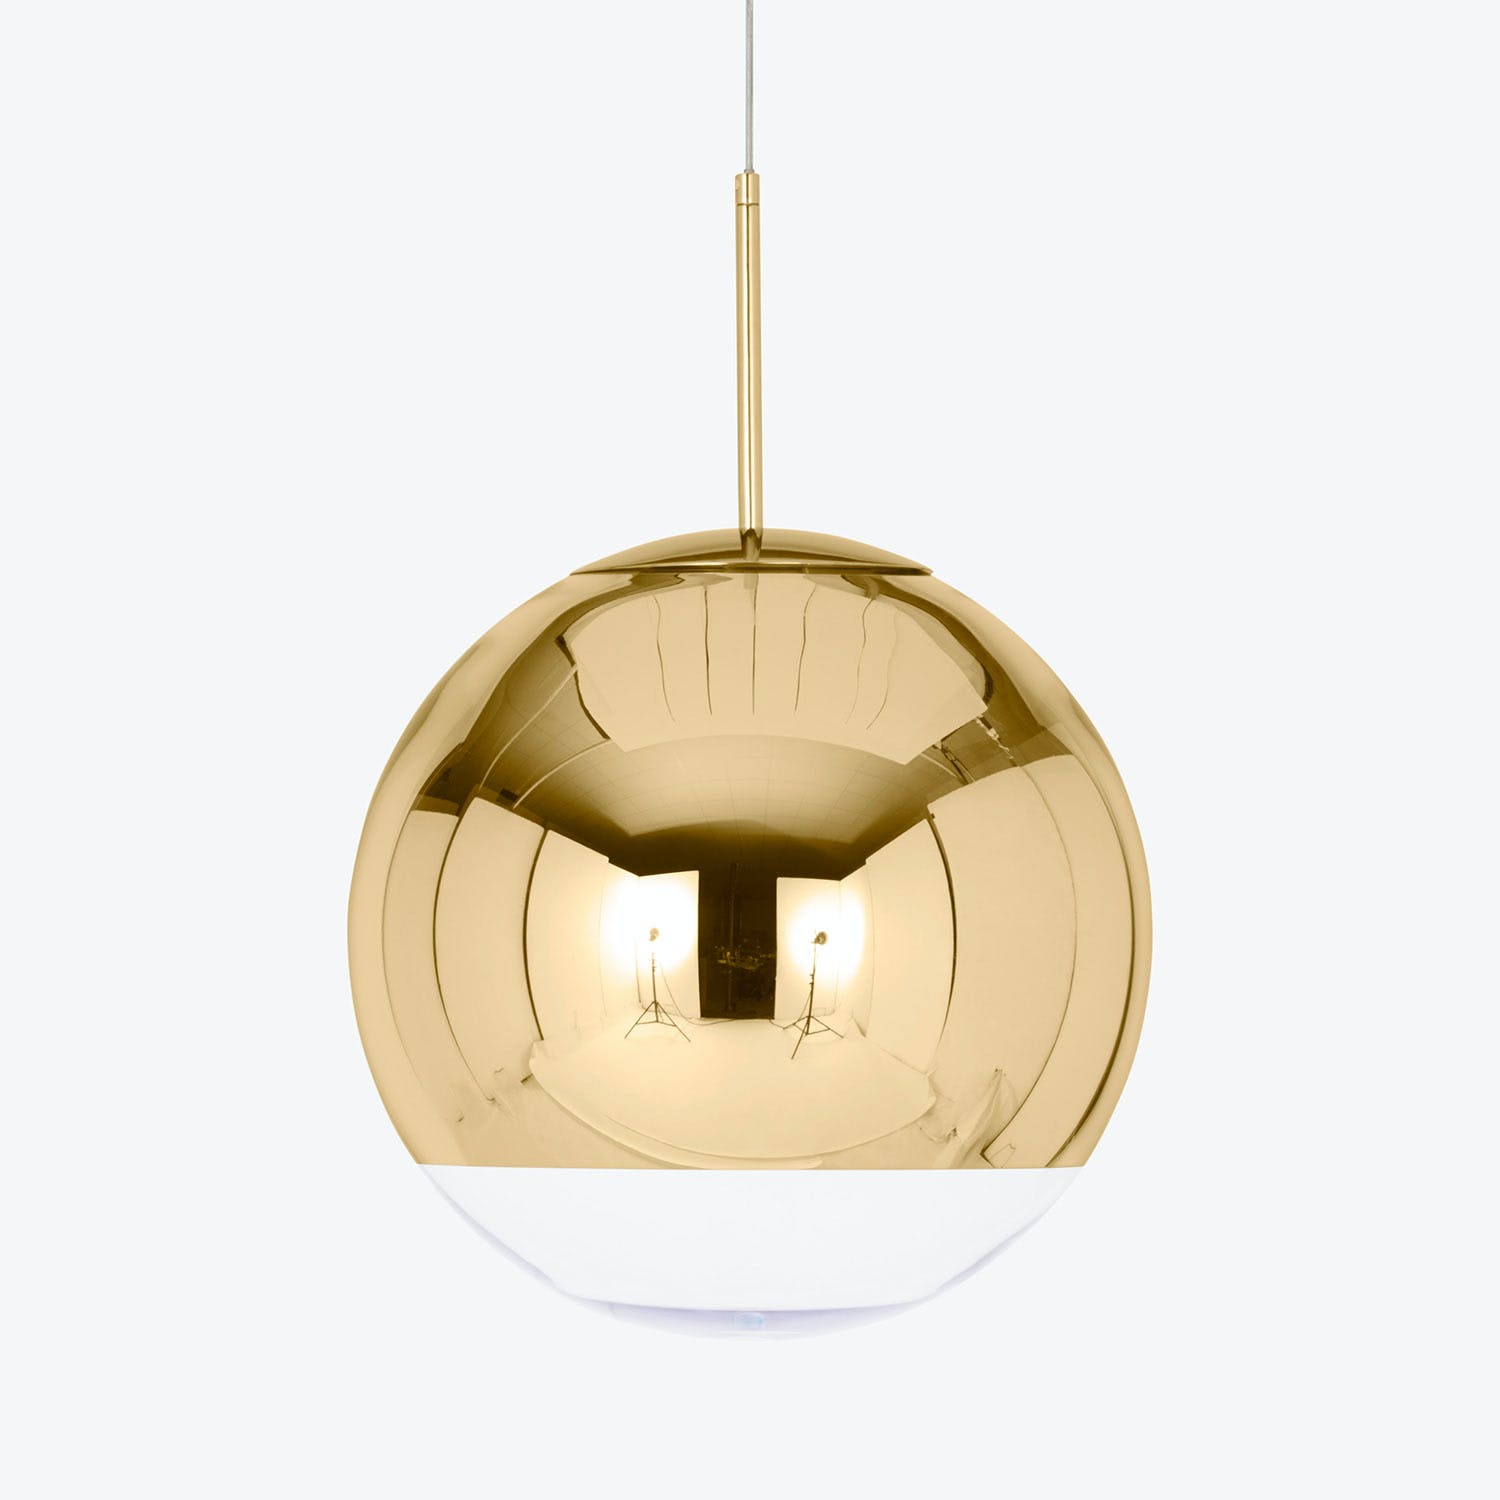 Contemporary pendant light fixture with shiny gold finish and translucent lower half.